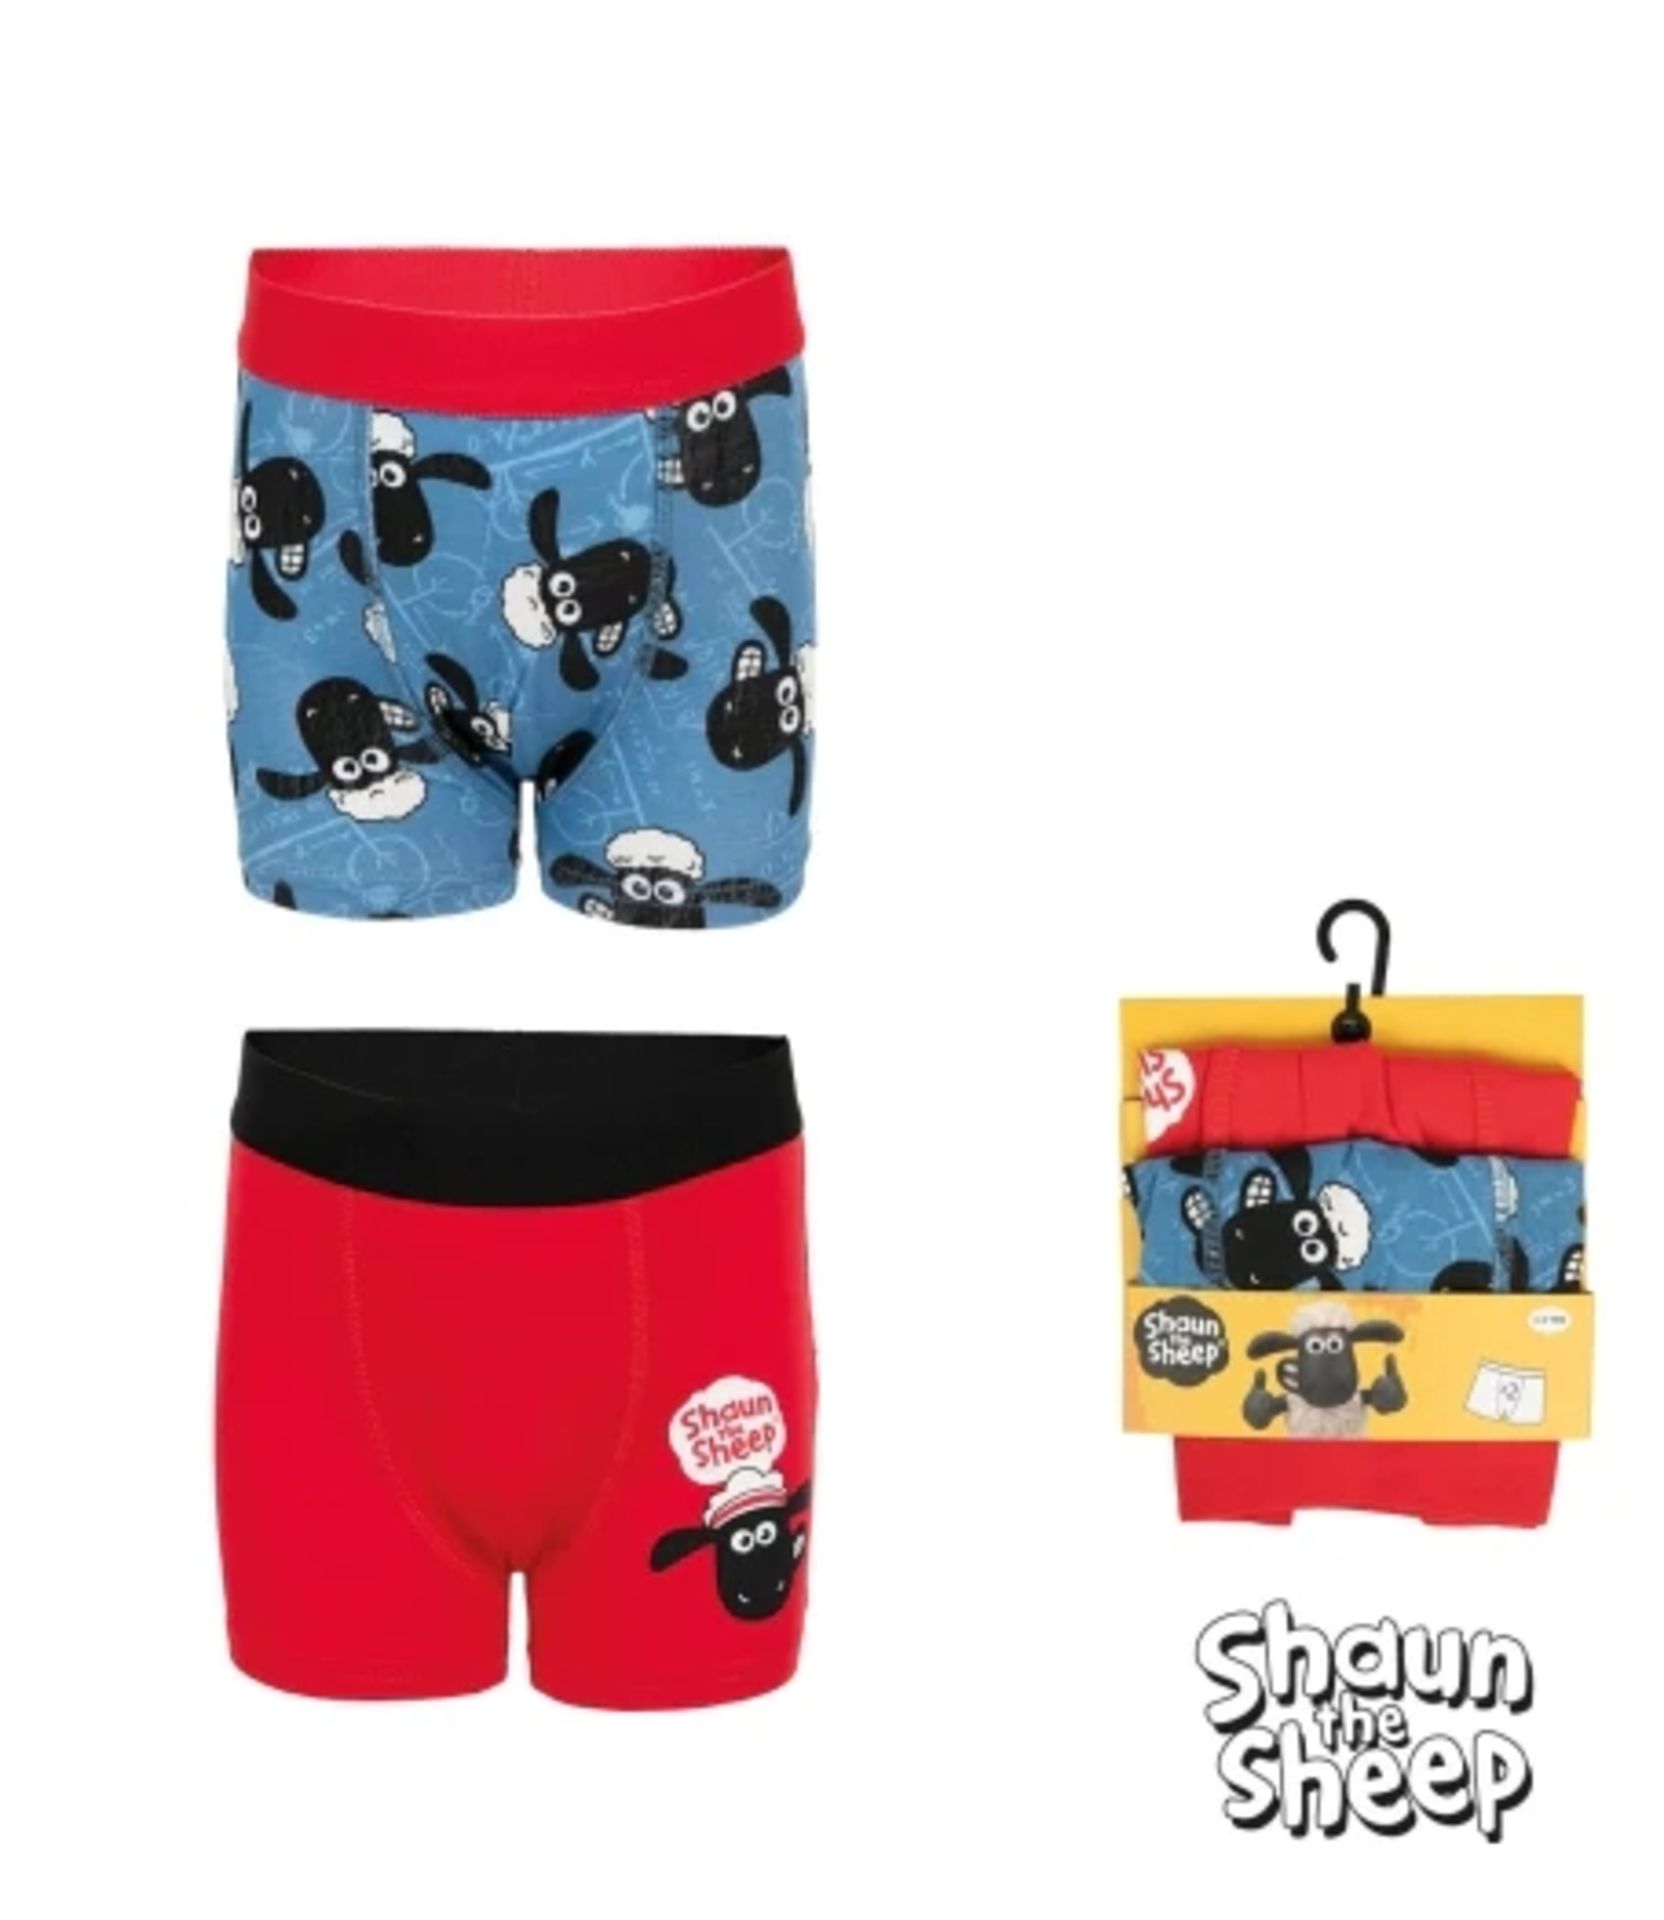 25 x New & Packaged Official Licenced Shaun The Sheep Packs of 2 Boxer Shorts. Sizes: 1-2, 3-4, 5- - Bild 2 aus 2